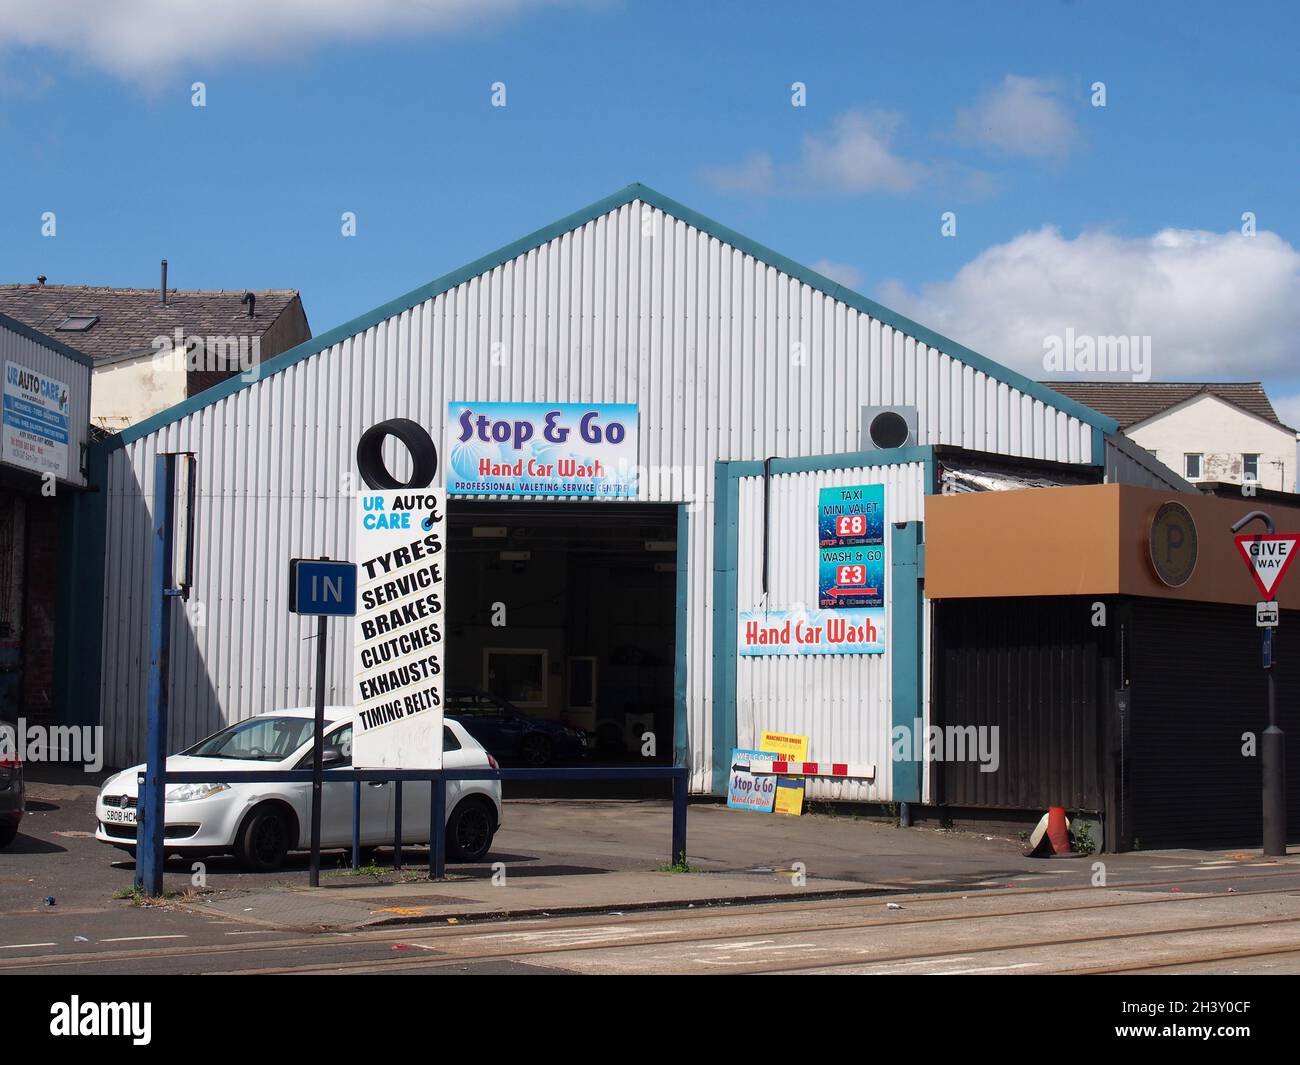 The stop and go hand car wash and uk auto care garage in rochdale greater manchester Stock Photo